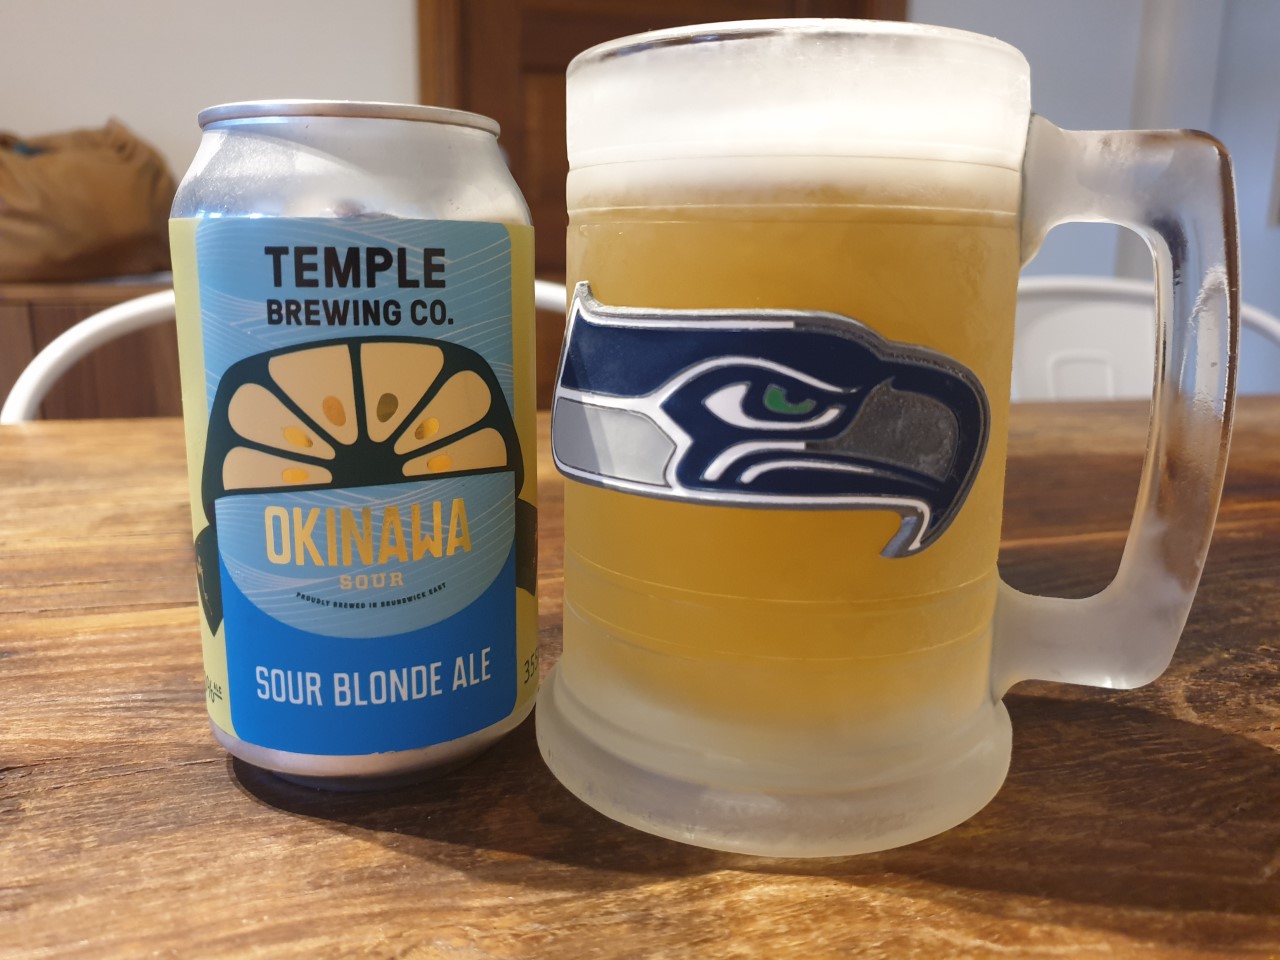 Okinawa Sour Blonde Ale by Temple Brewing Co